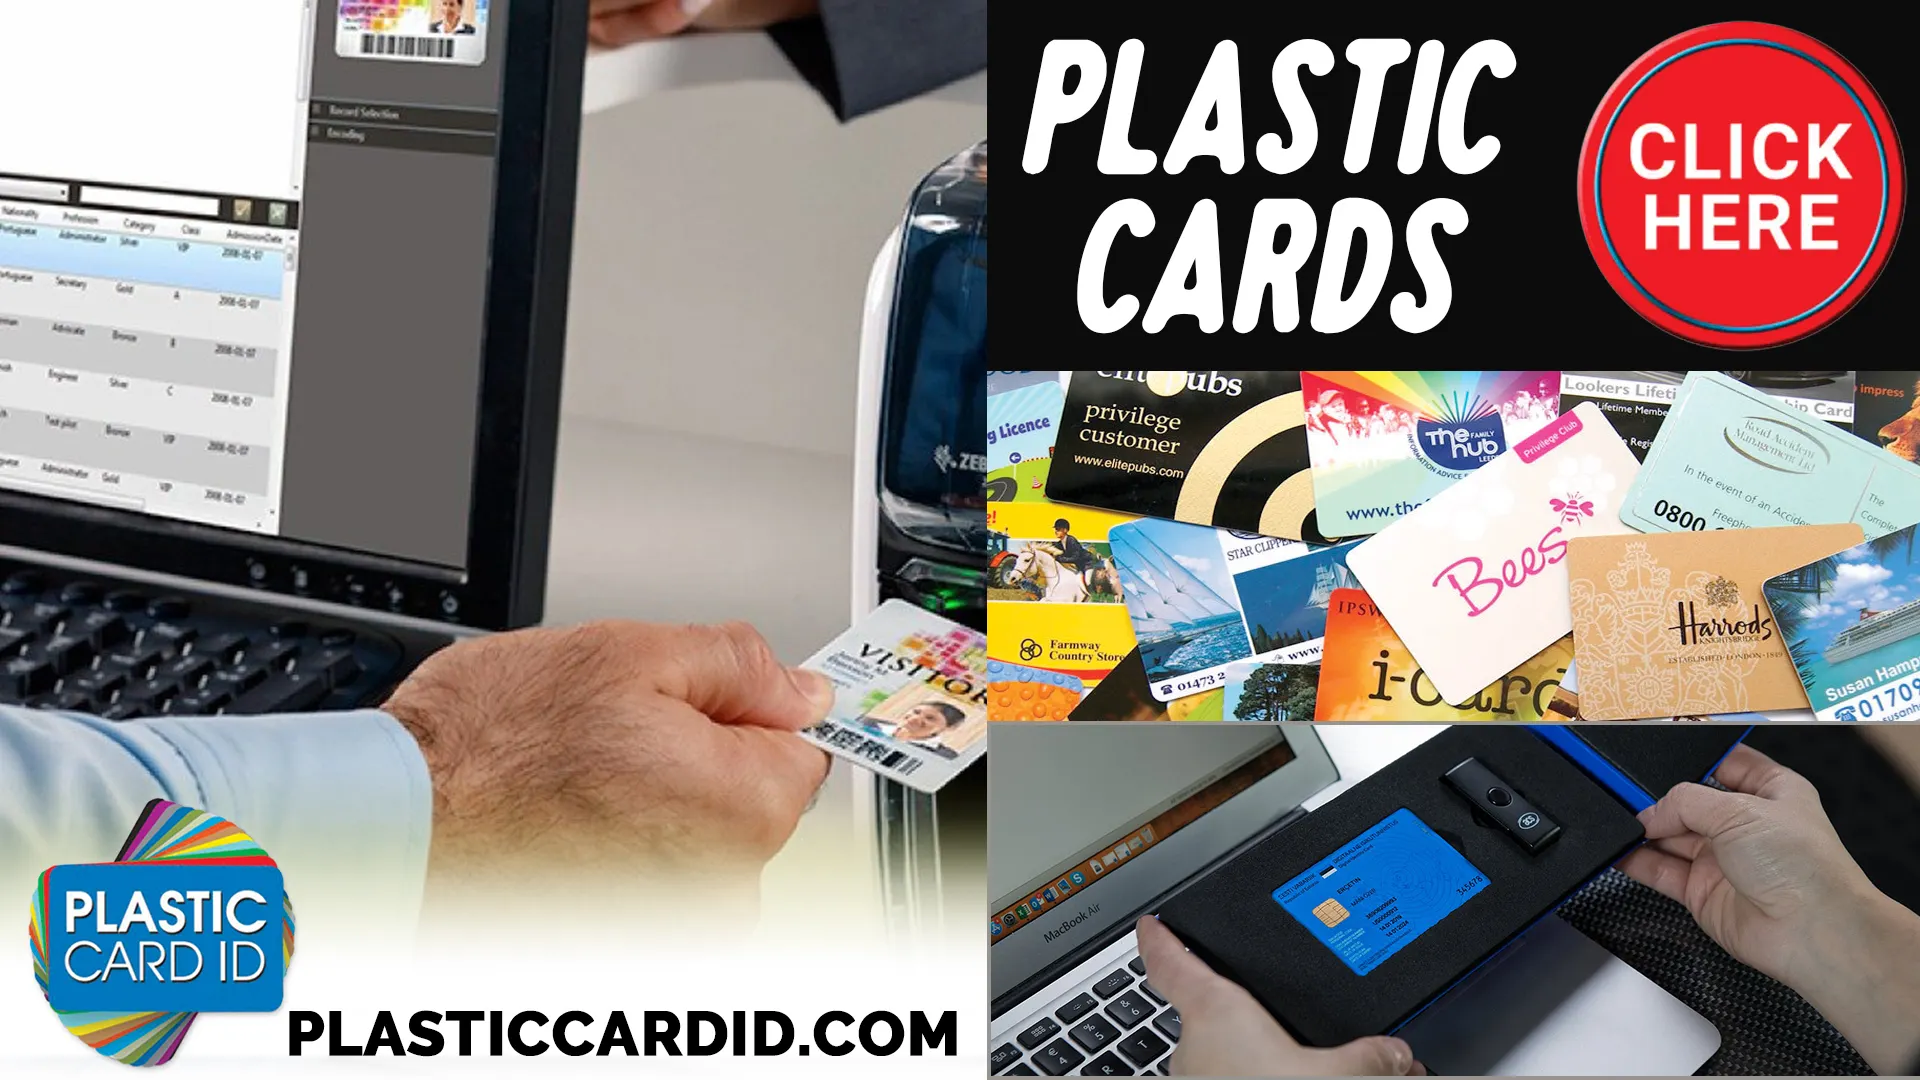 Your Satisfaction, Our Priority: Plastic Card ID
's Exceptional Customer Care